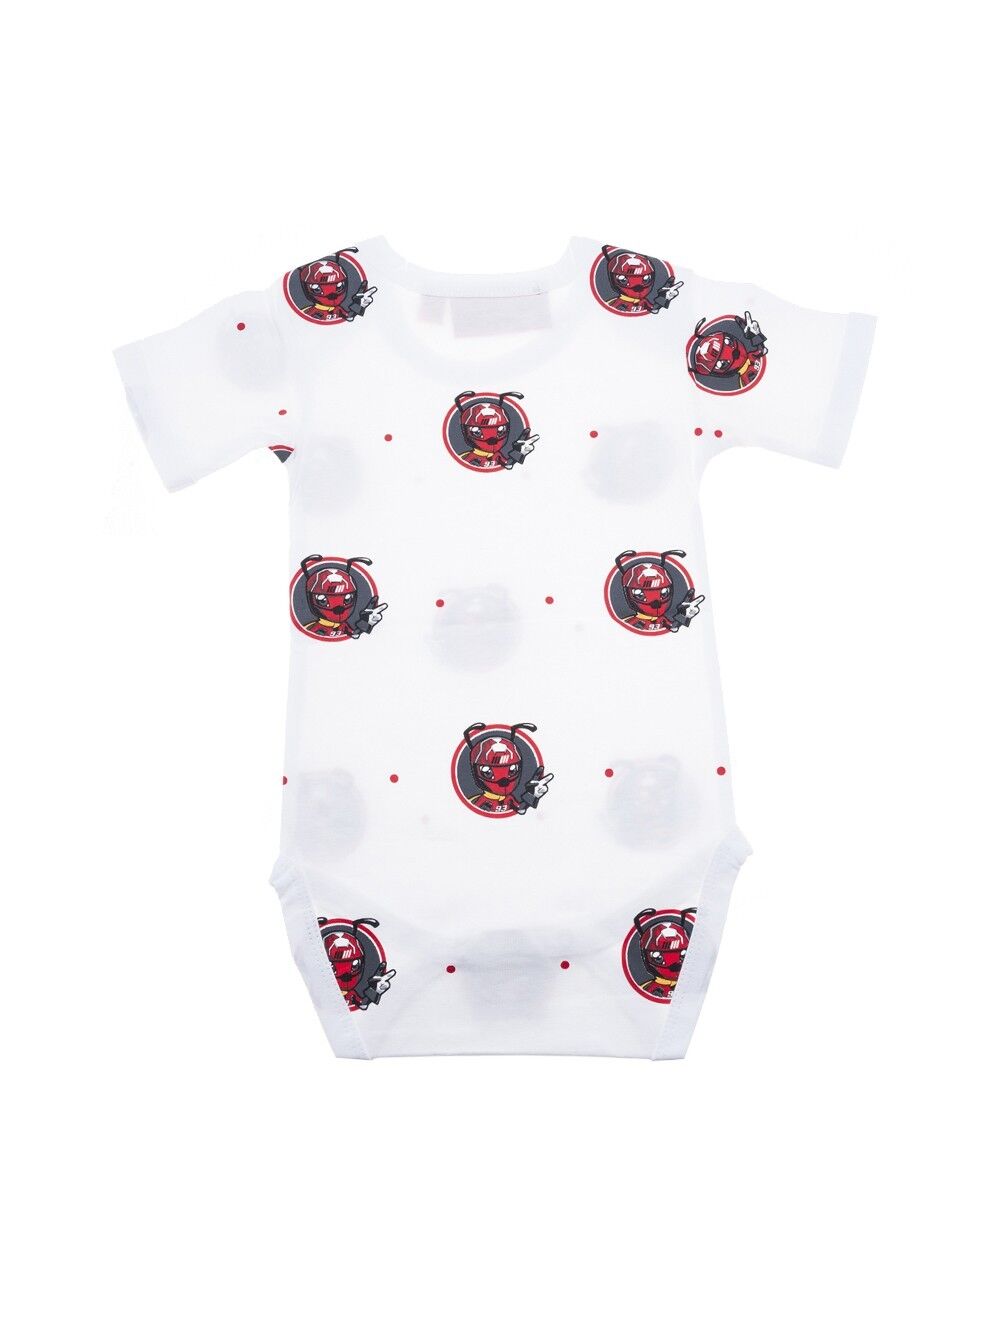 New Official Marc Marquez 93 Baby Romper - 16 83007